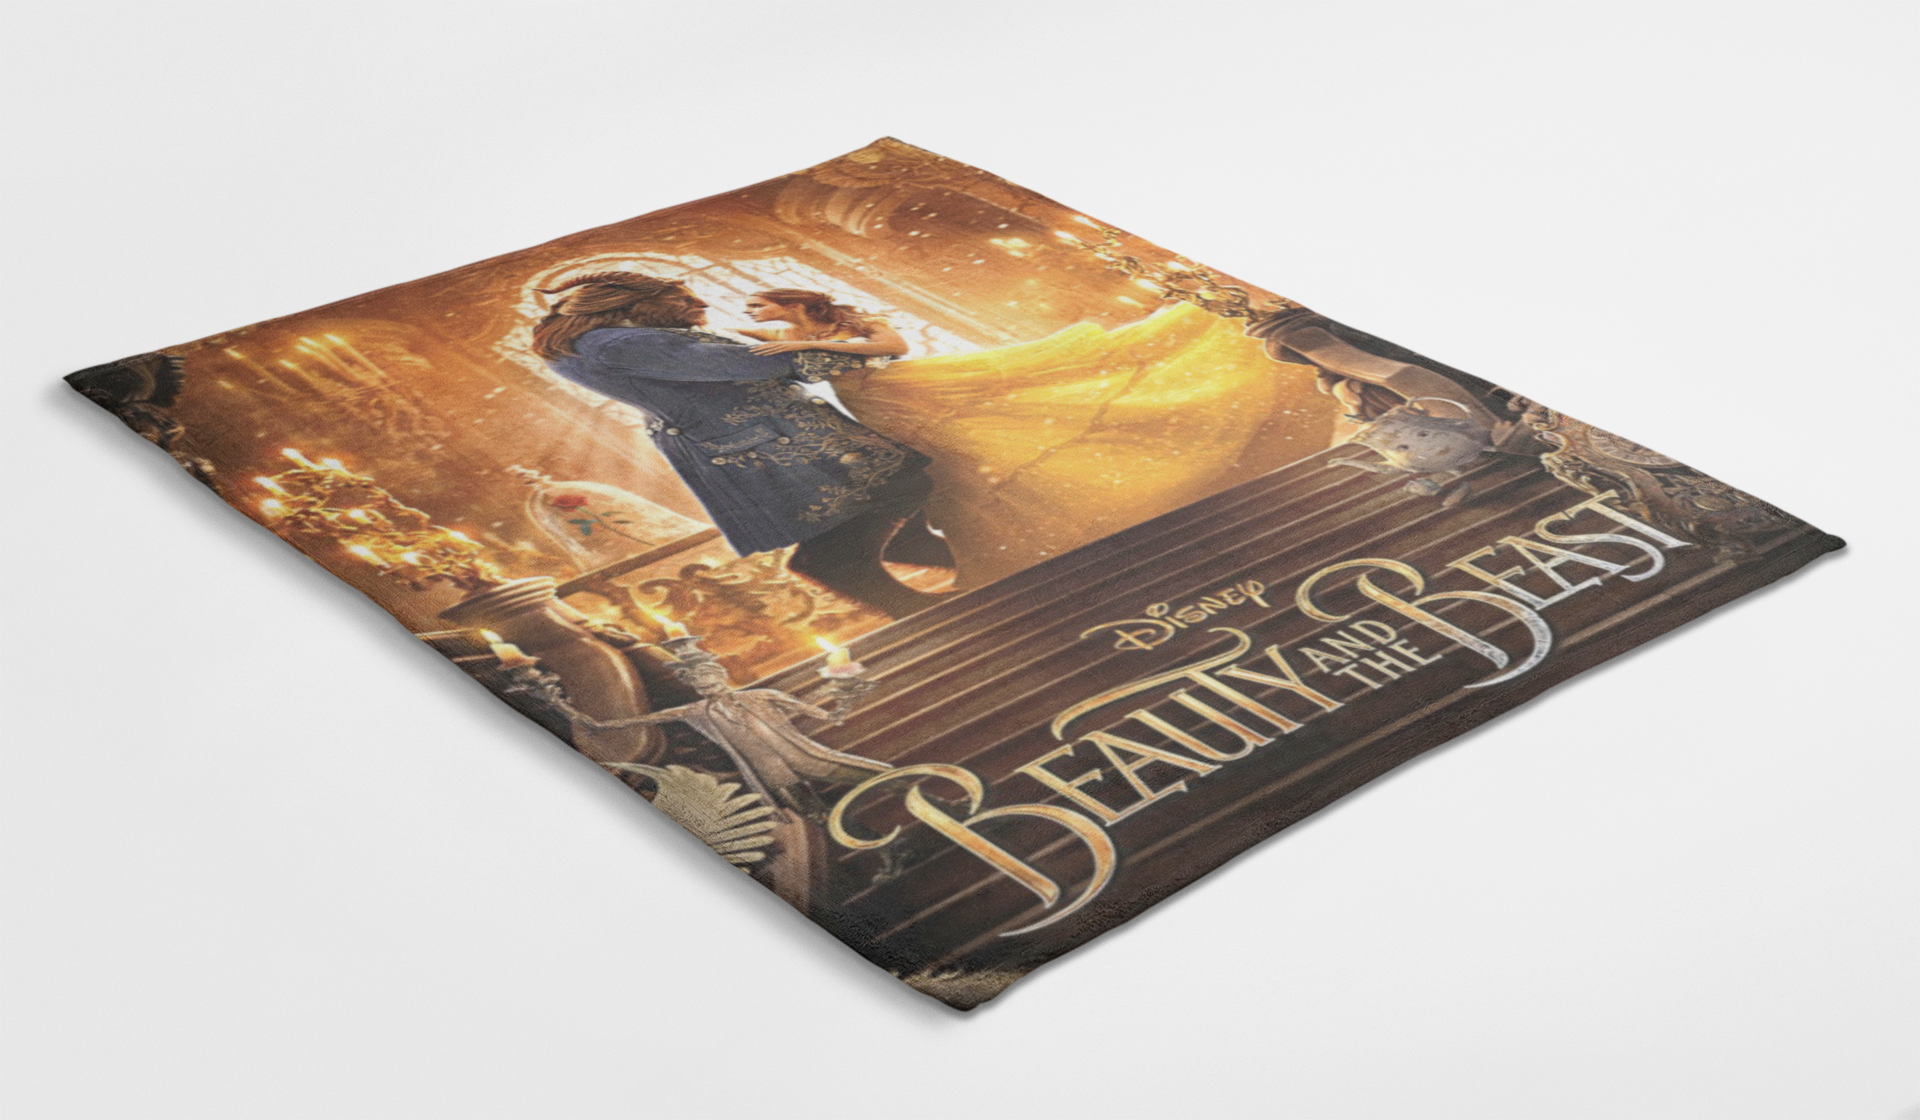 Movie Beauty and The Beast Covers Blanket